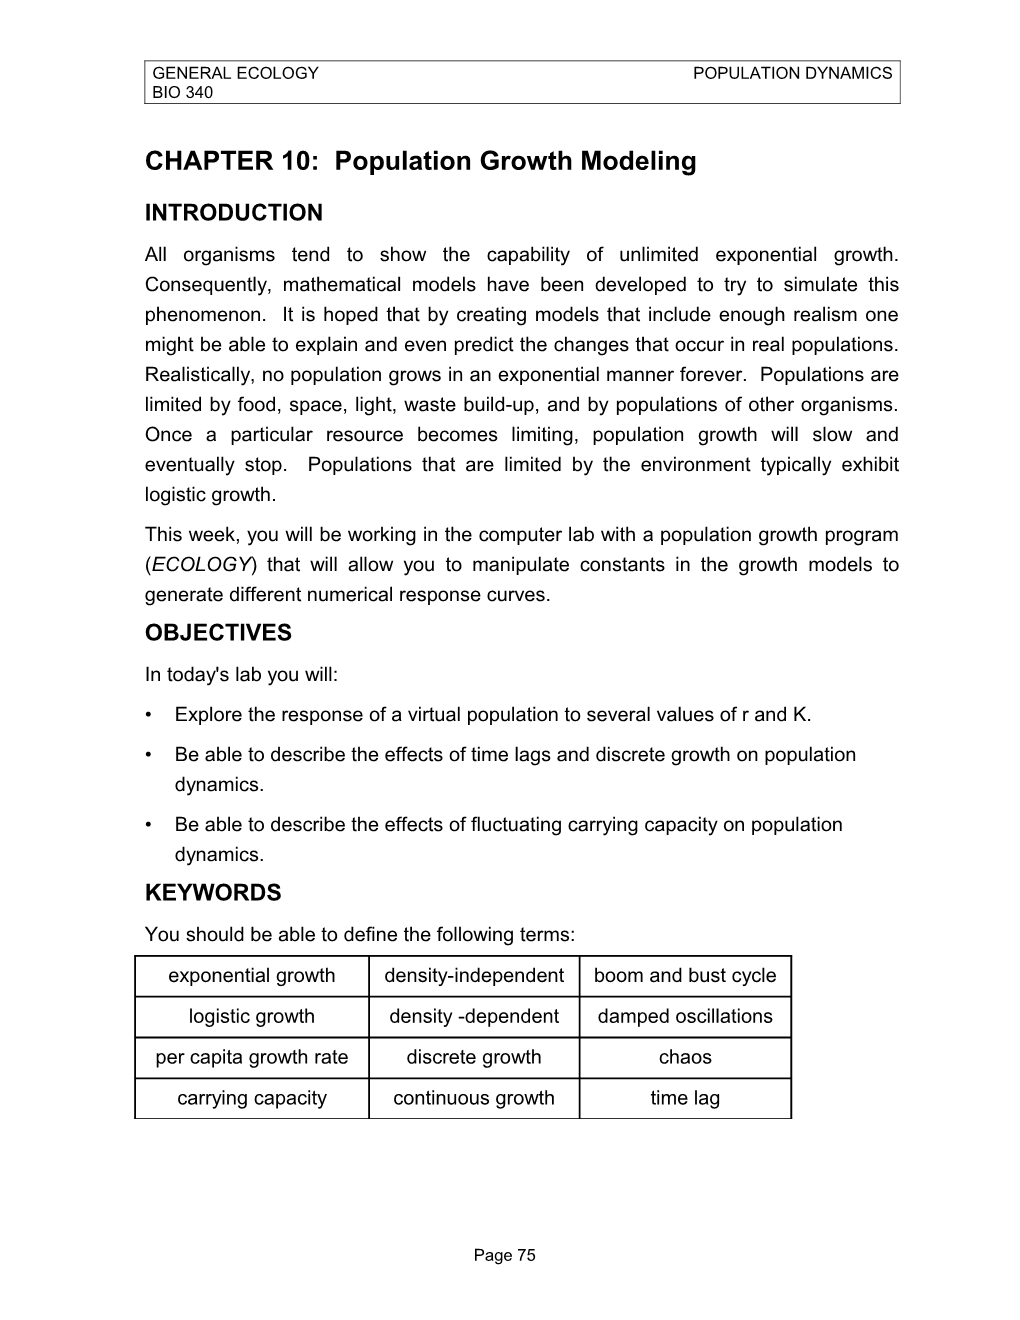 Chapter 10: Population Growth Modeling